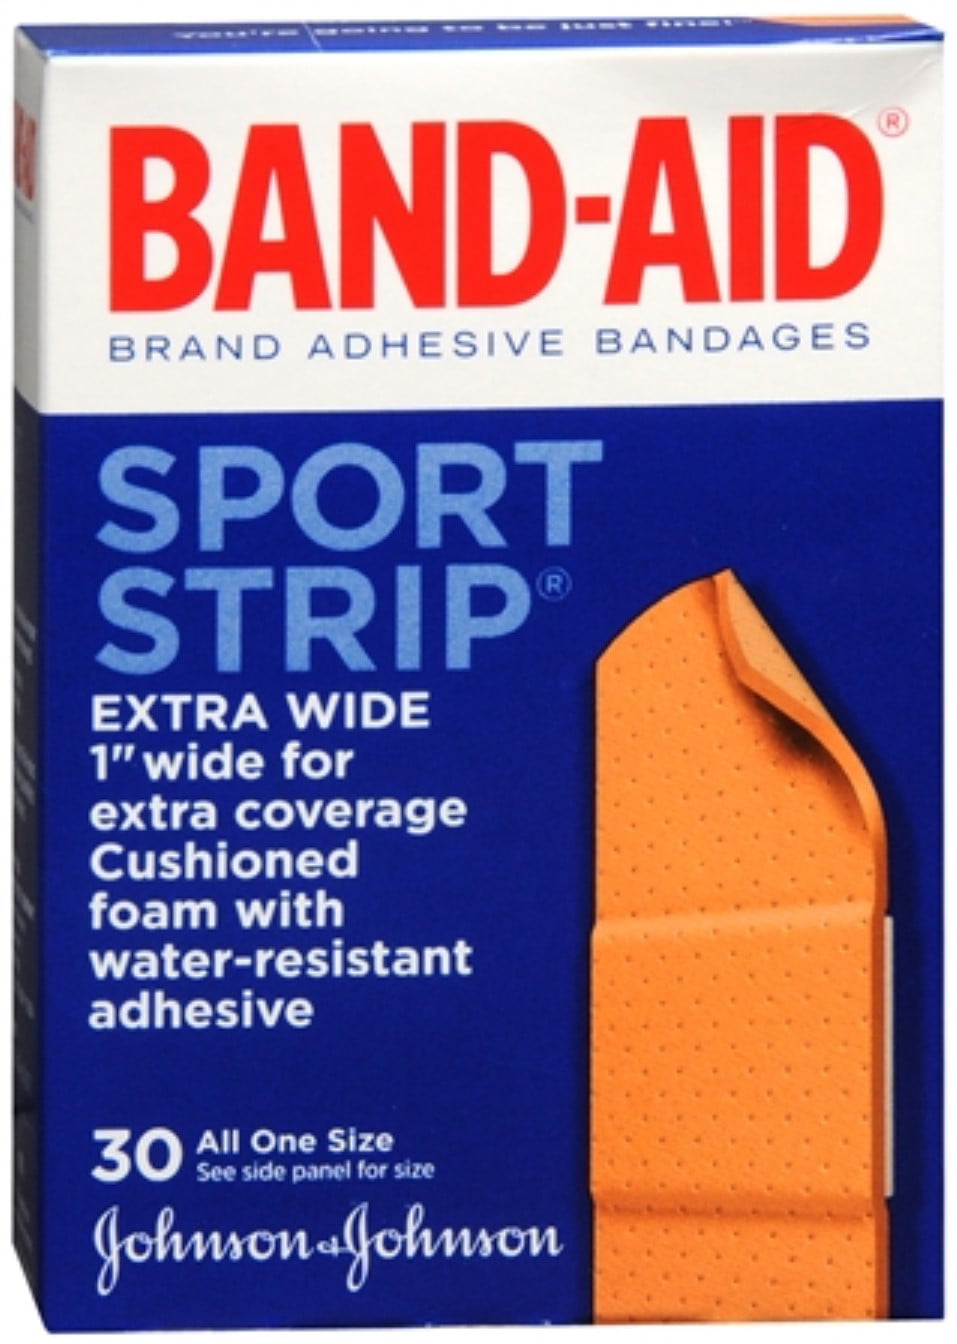 Waterproof Breathable Bandaid Cuts Large Comfortable Blister Plasters 30 Pack 